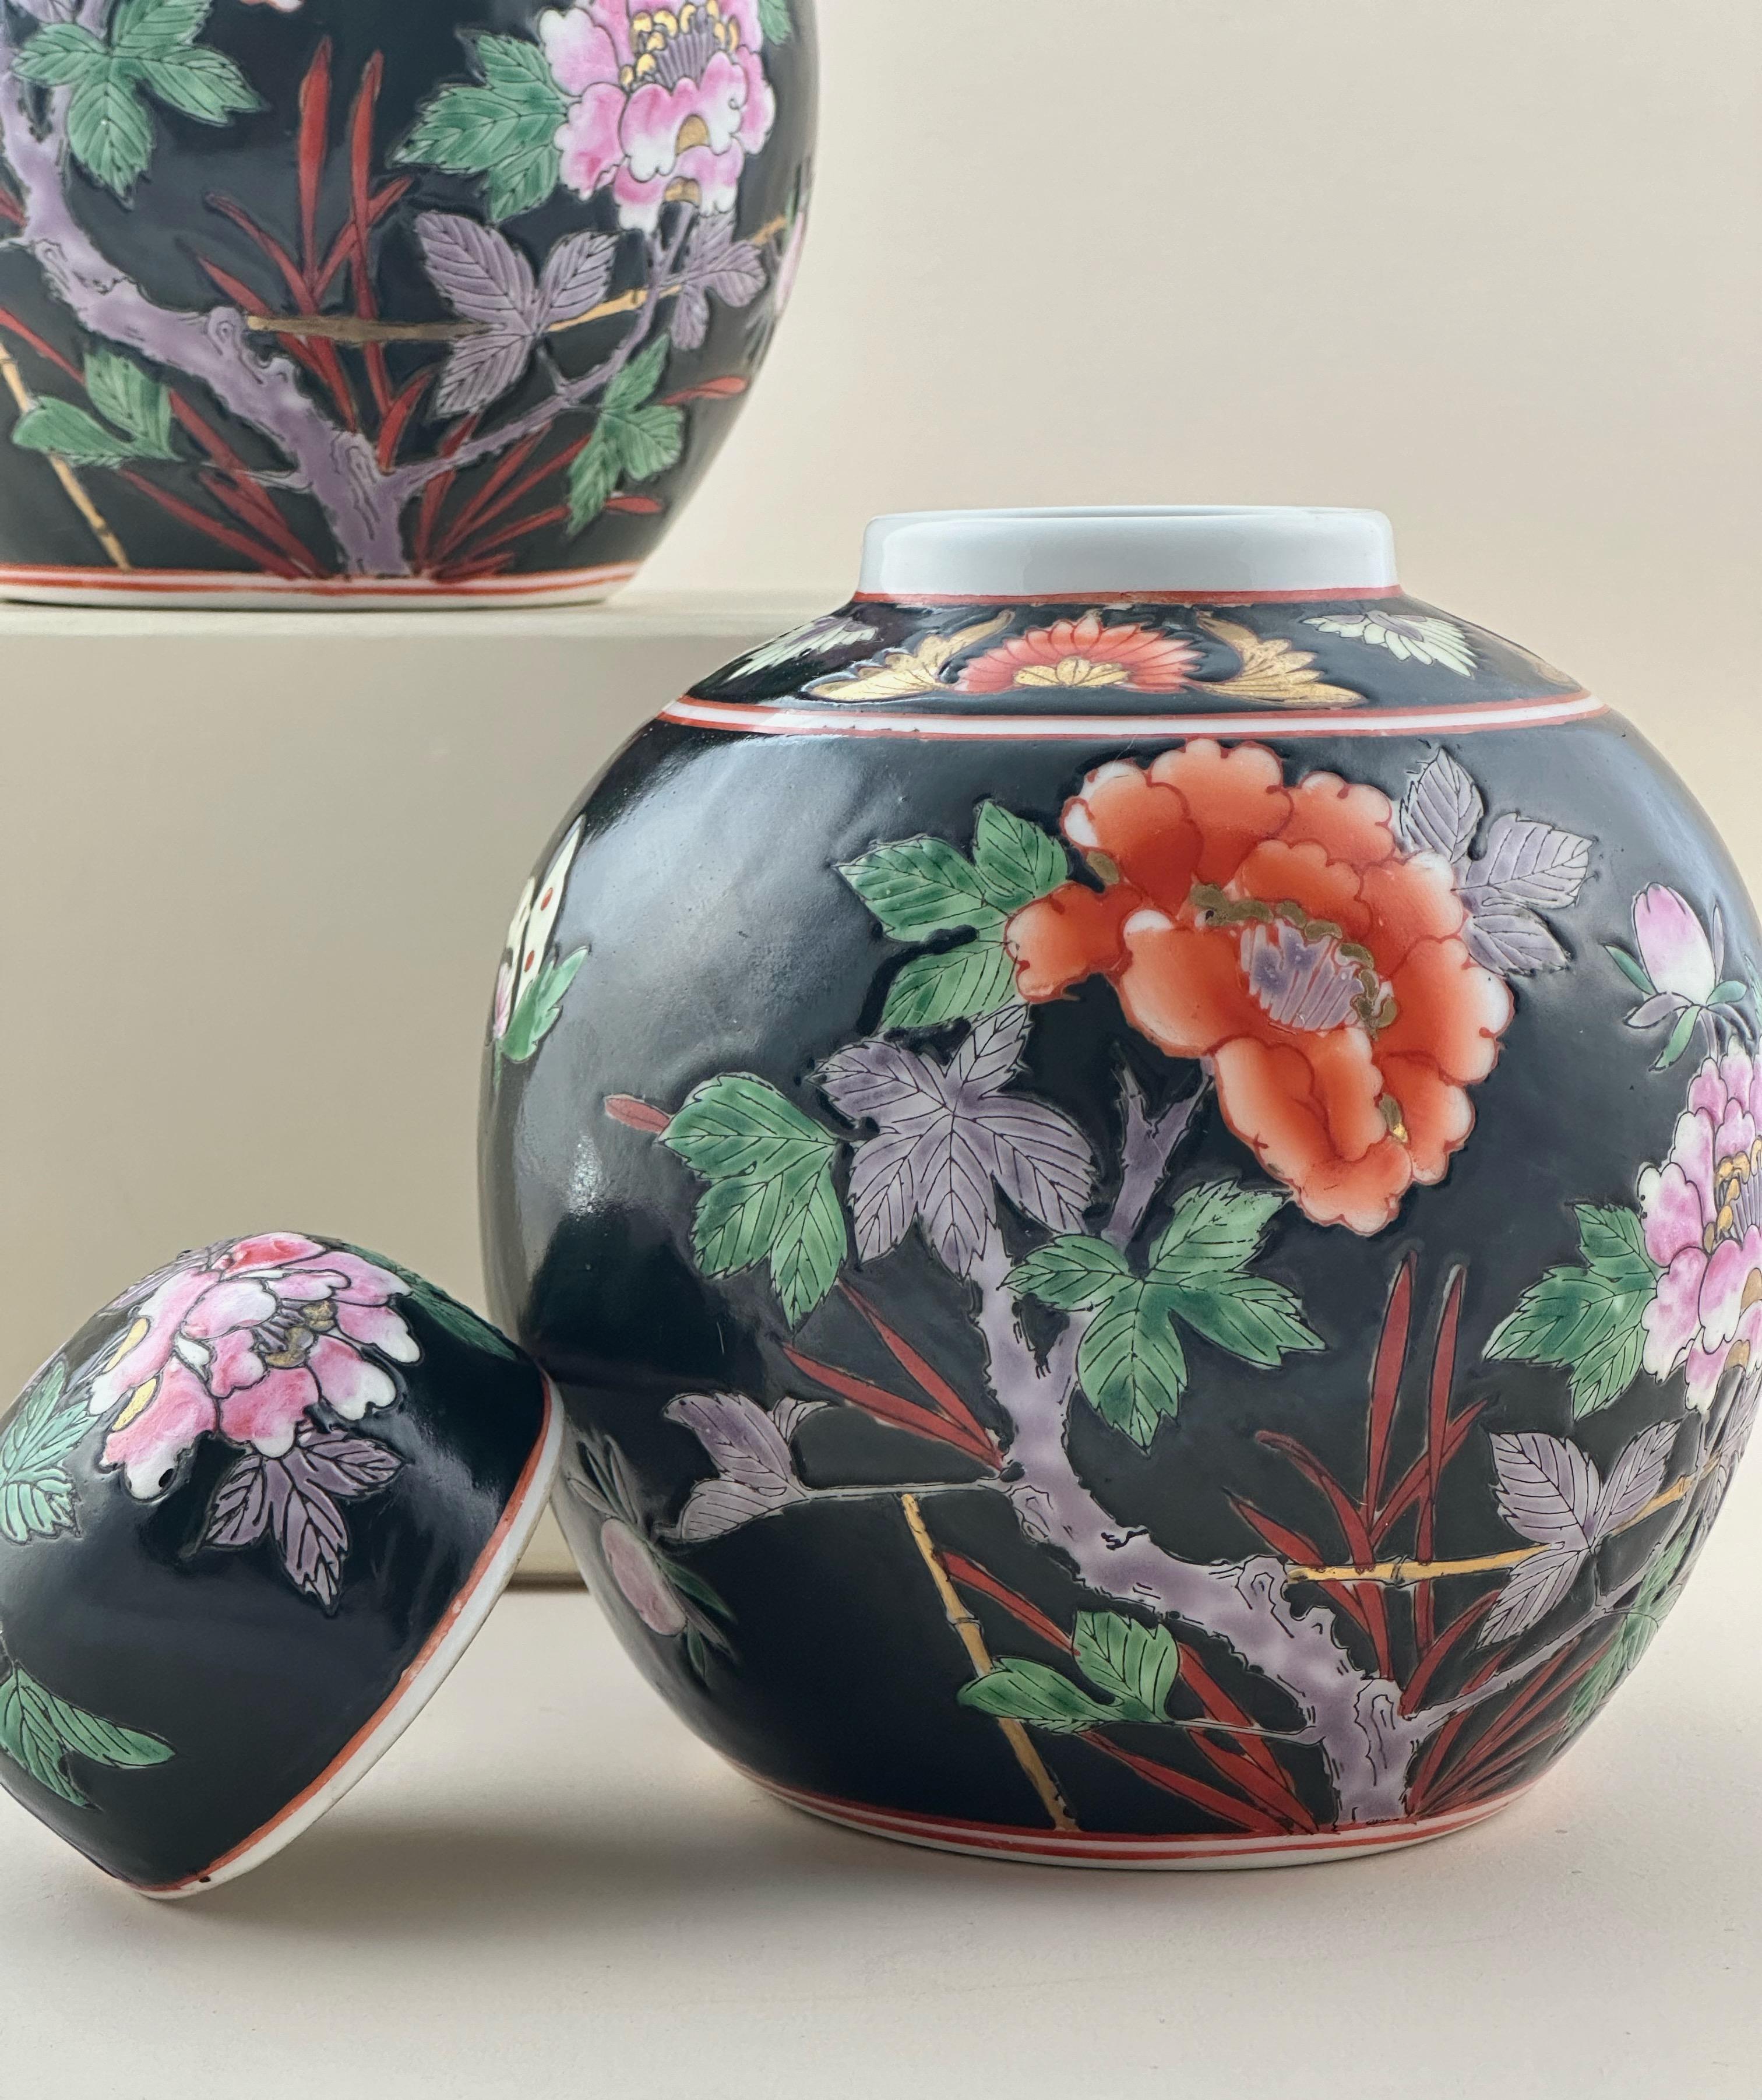 A matching pair of vintage Chinese porcelain ginger jars, hand-crafted in China during the latter half of the 20th century, specifically the 1970s.

Both ginger jars have been decorated in the Famille Noire style, with details inspired by a